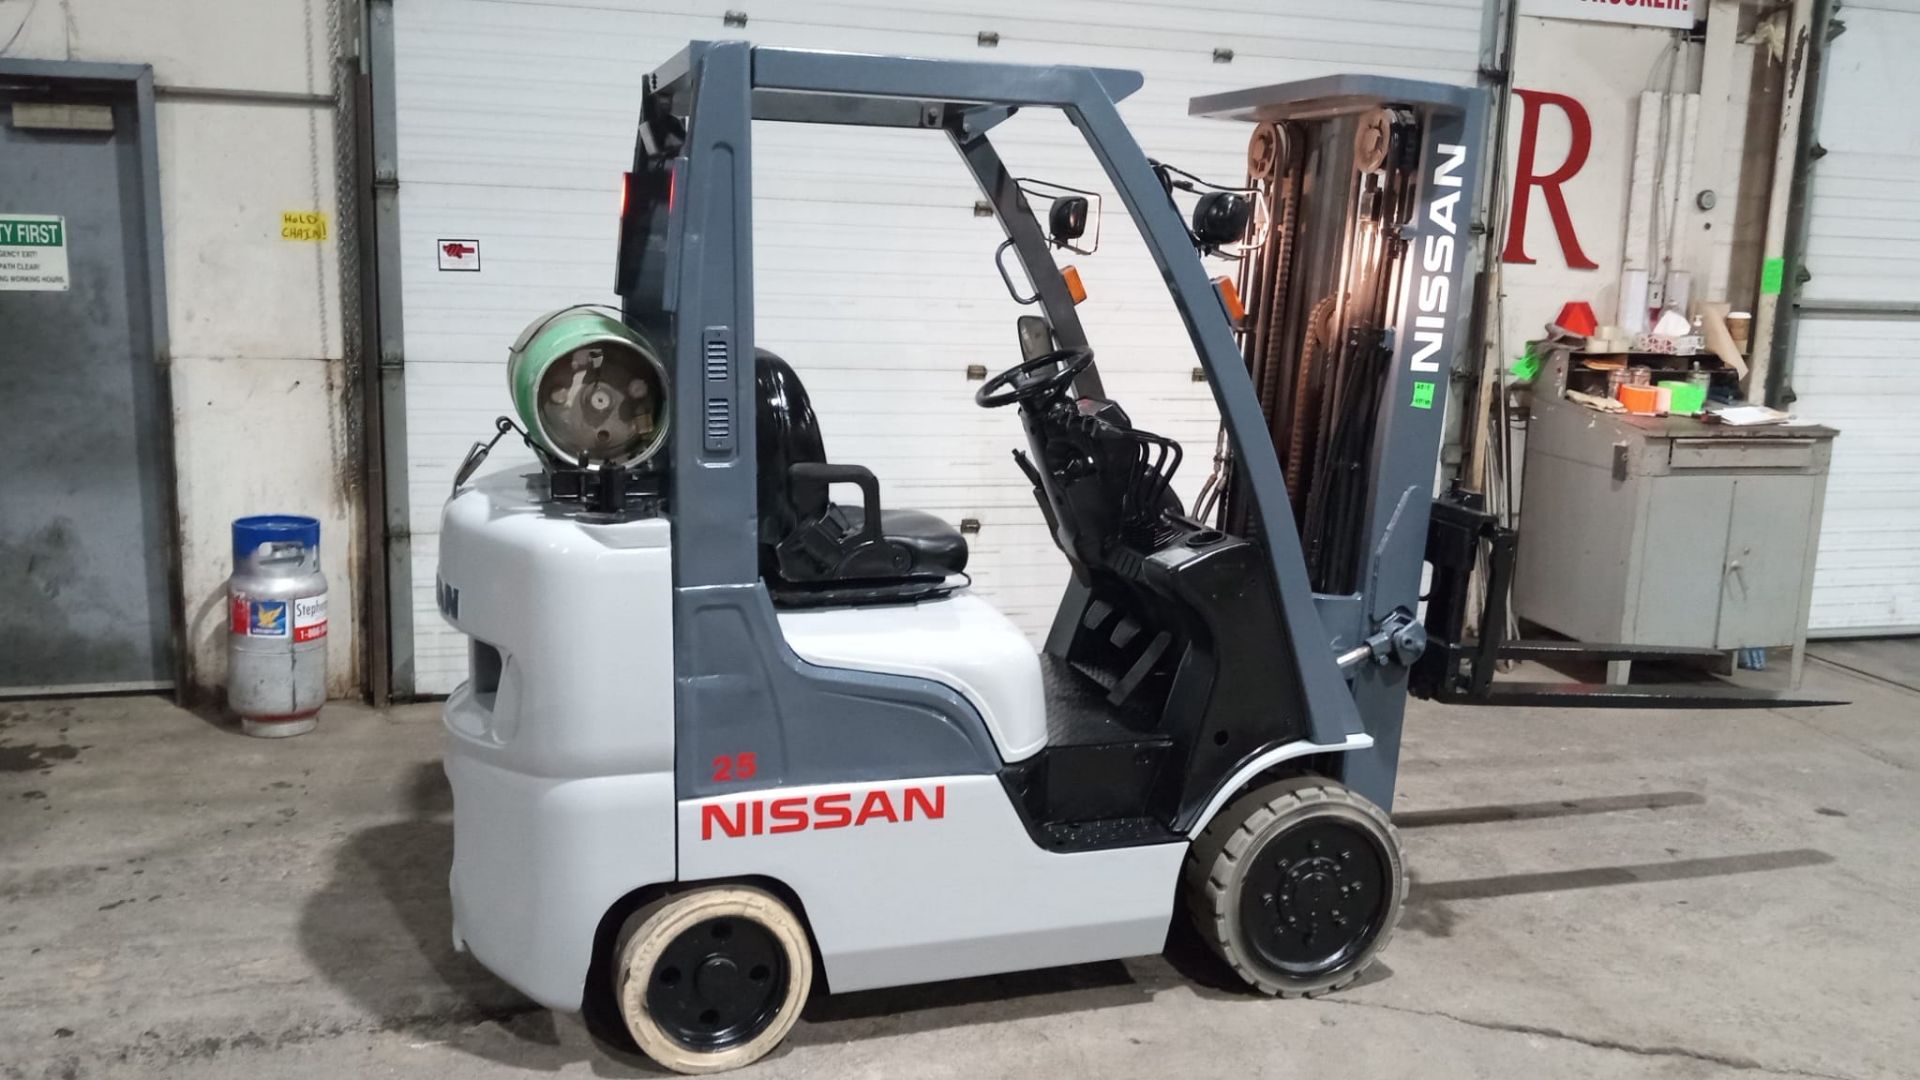 Nissan 5,000 Capacity Forklift LPG (Propane) with Sideshift and 3-STAGE MAST non-marking tires (no - Image 2 of 6